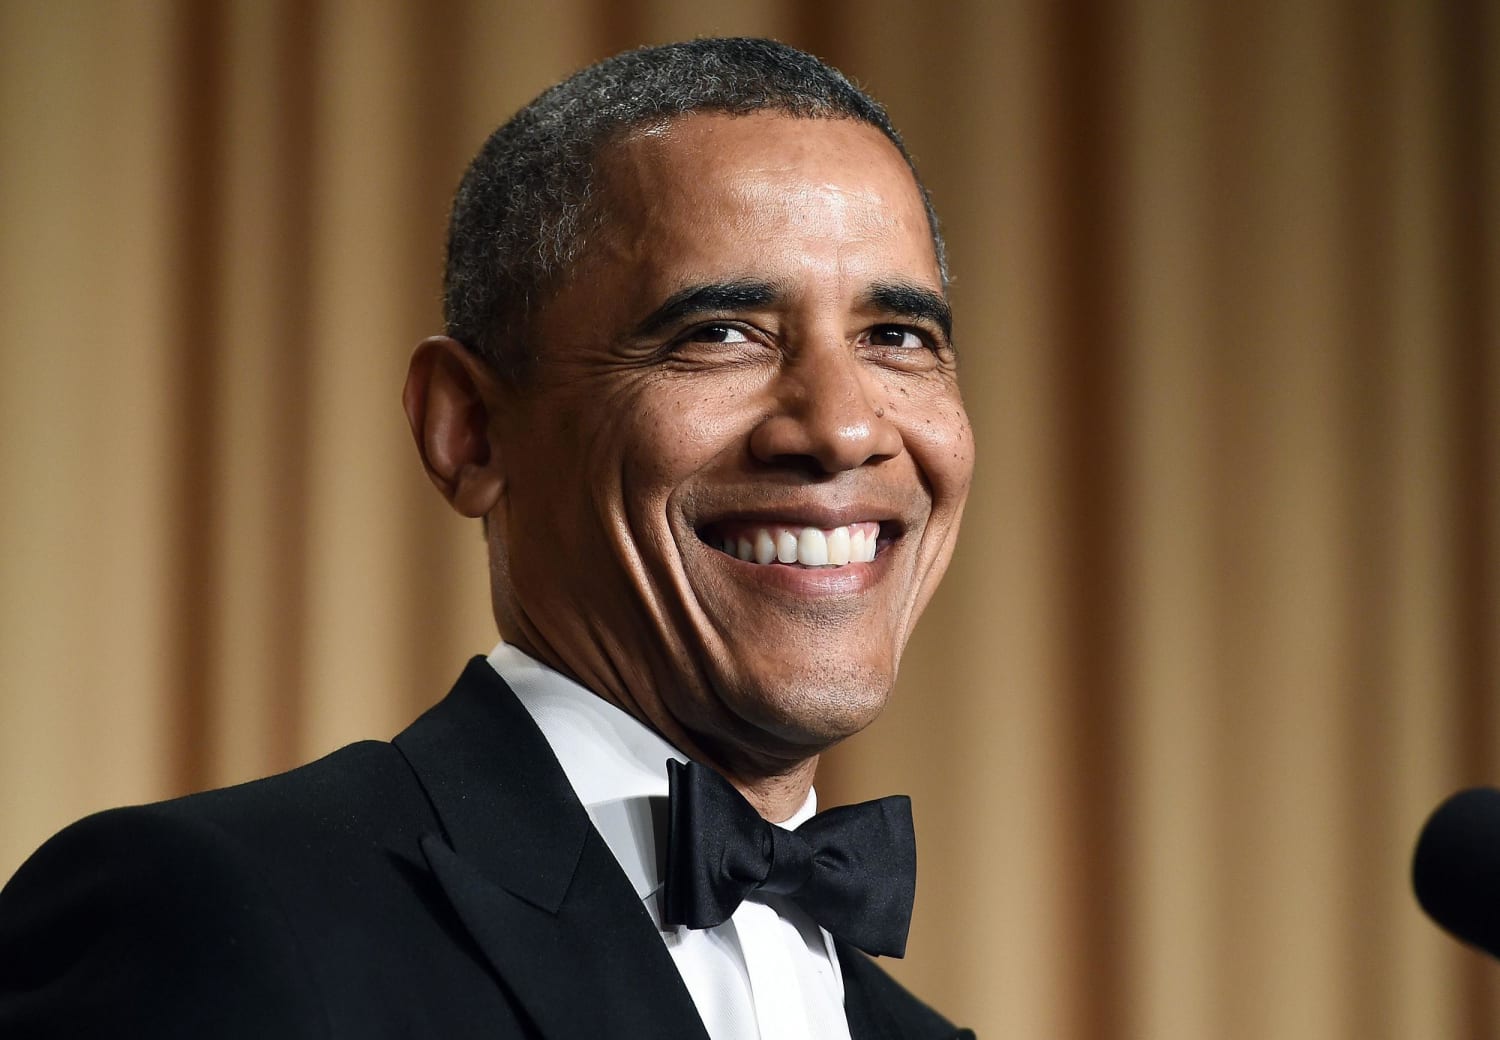 Comedian-in-Chief: Obama's Funniest Moments as President